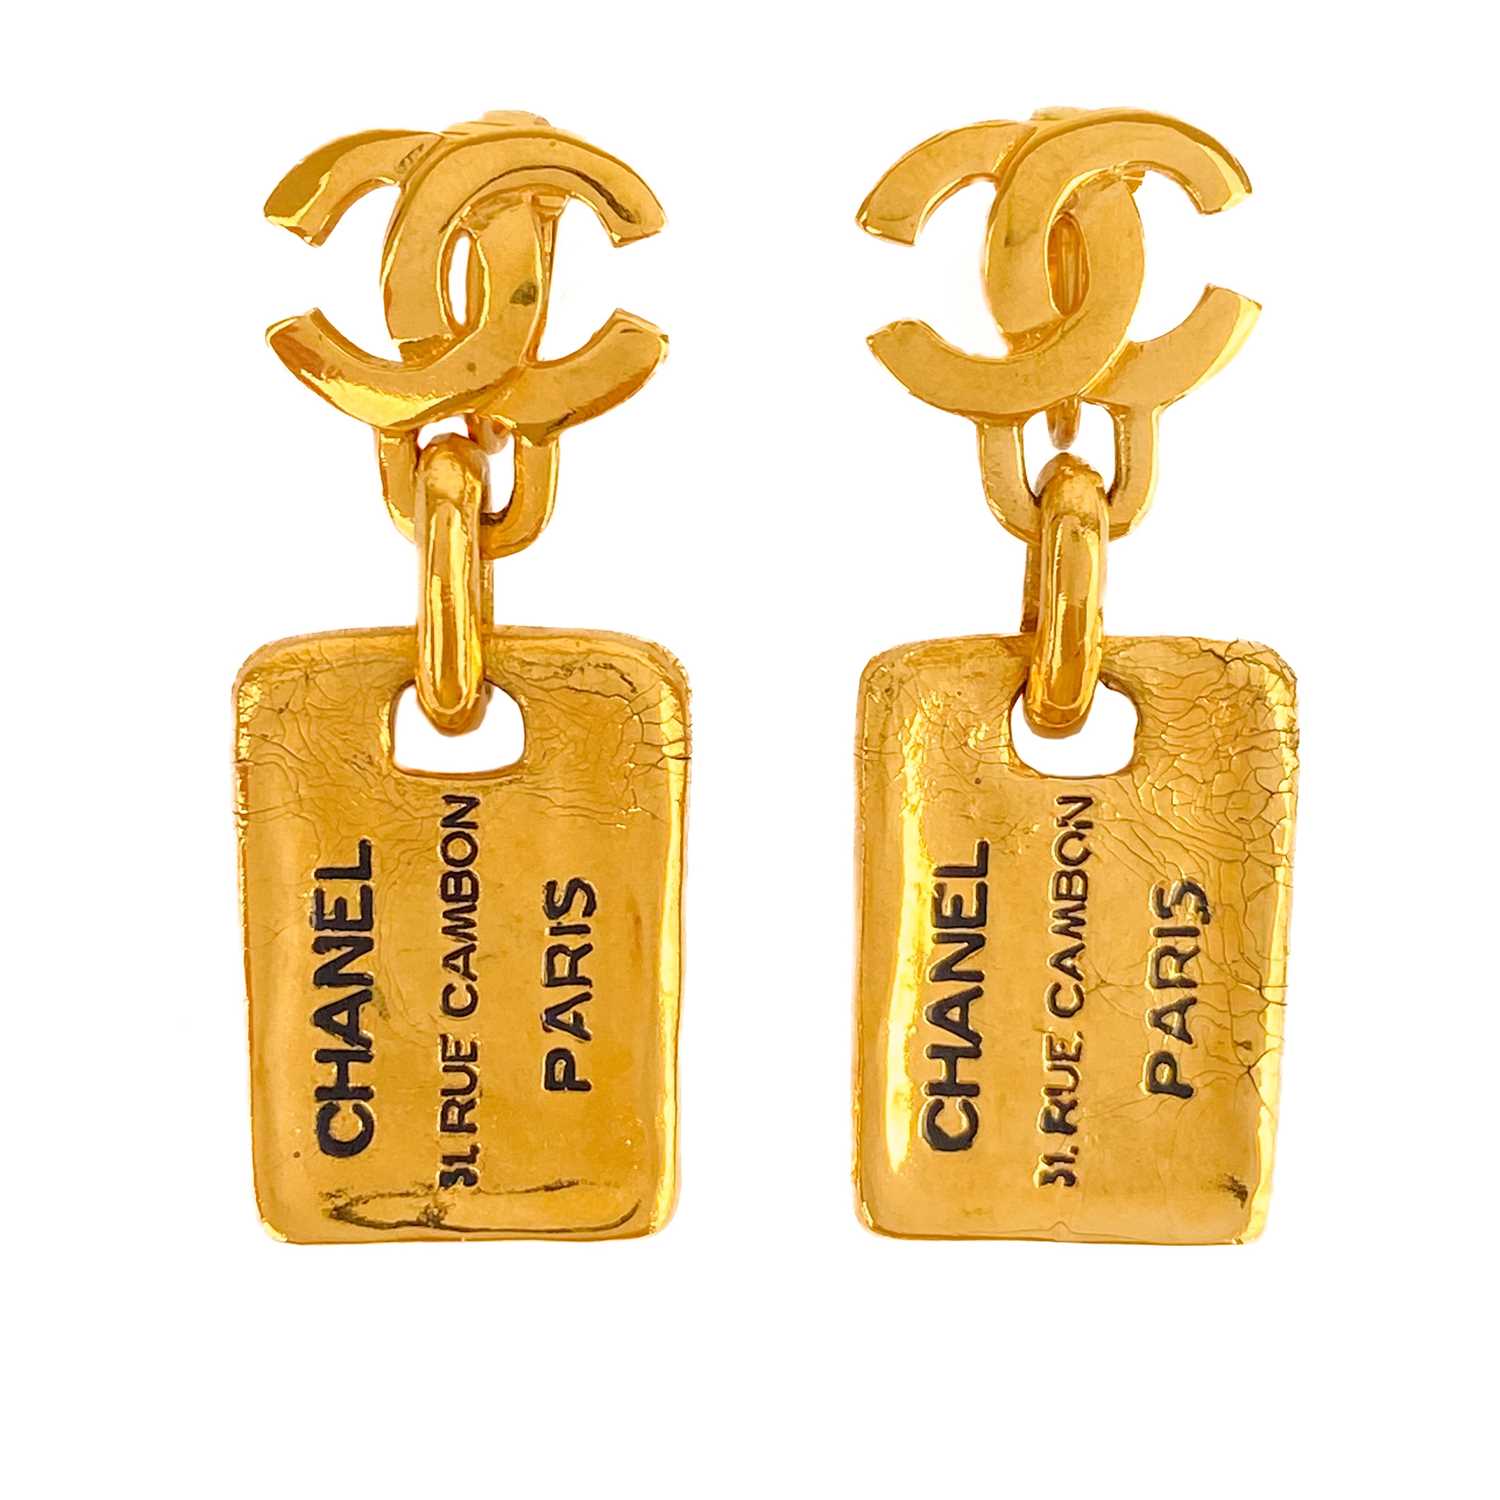 A Chanel 24ct gold-plated pair of CC and label pendant earrings, circa 1980's.